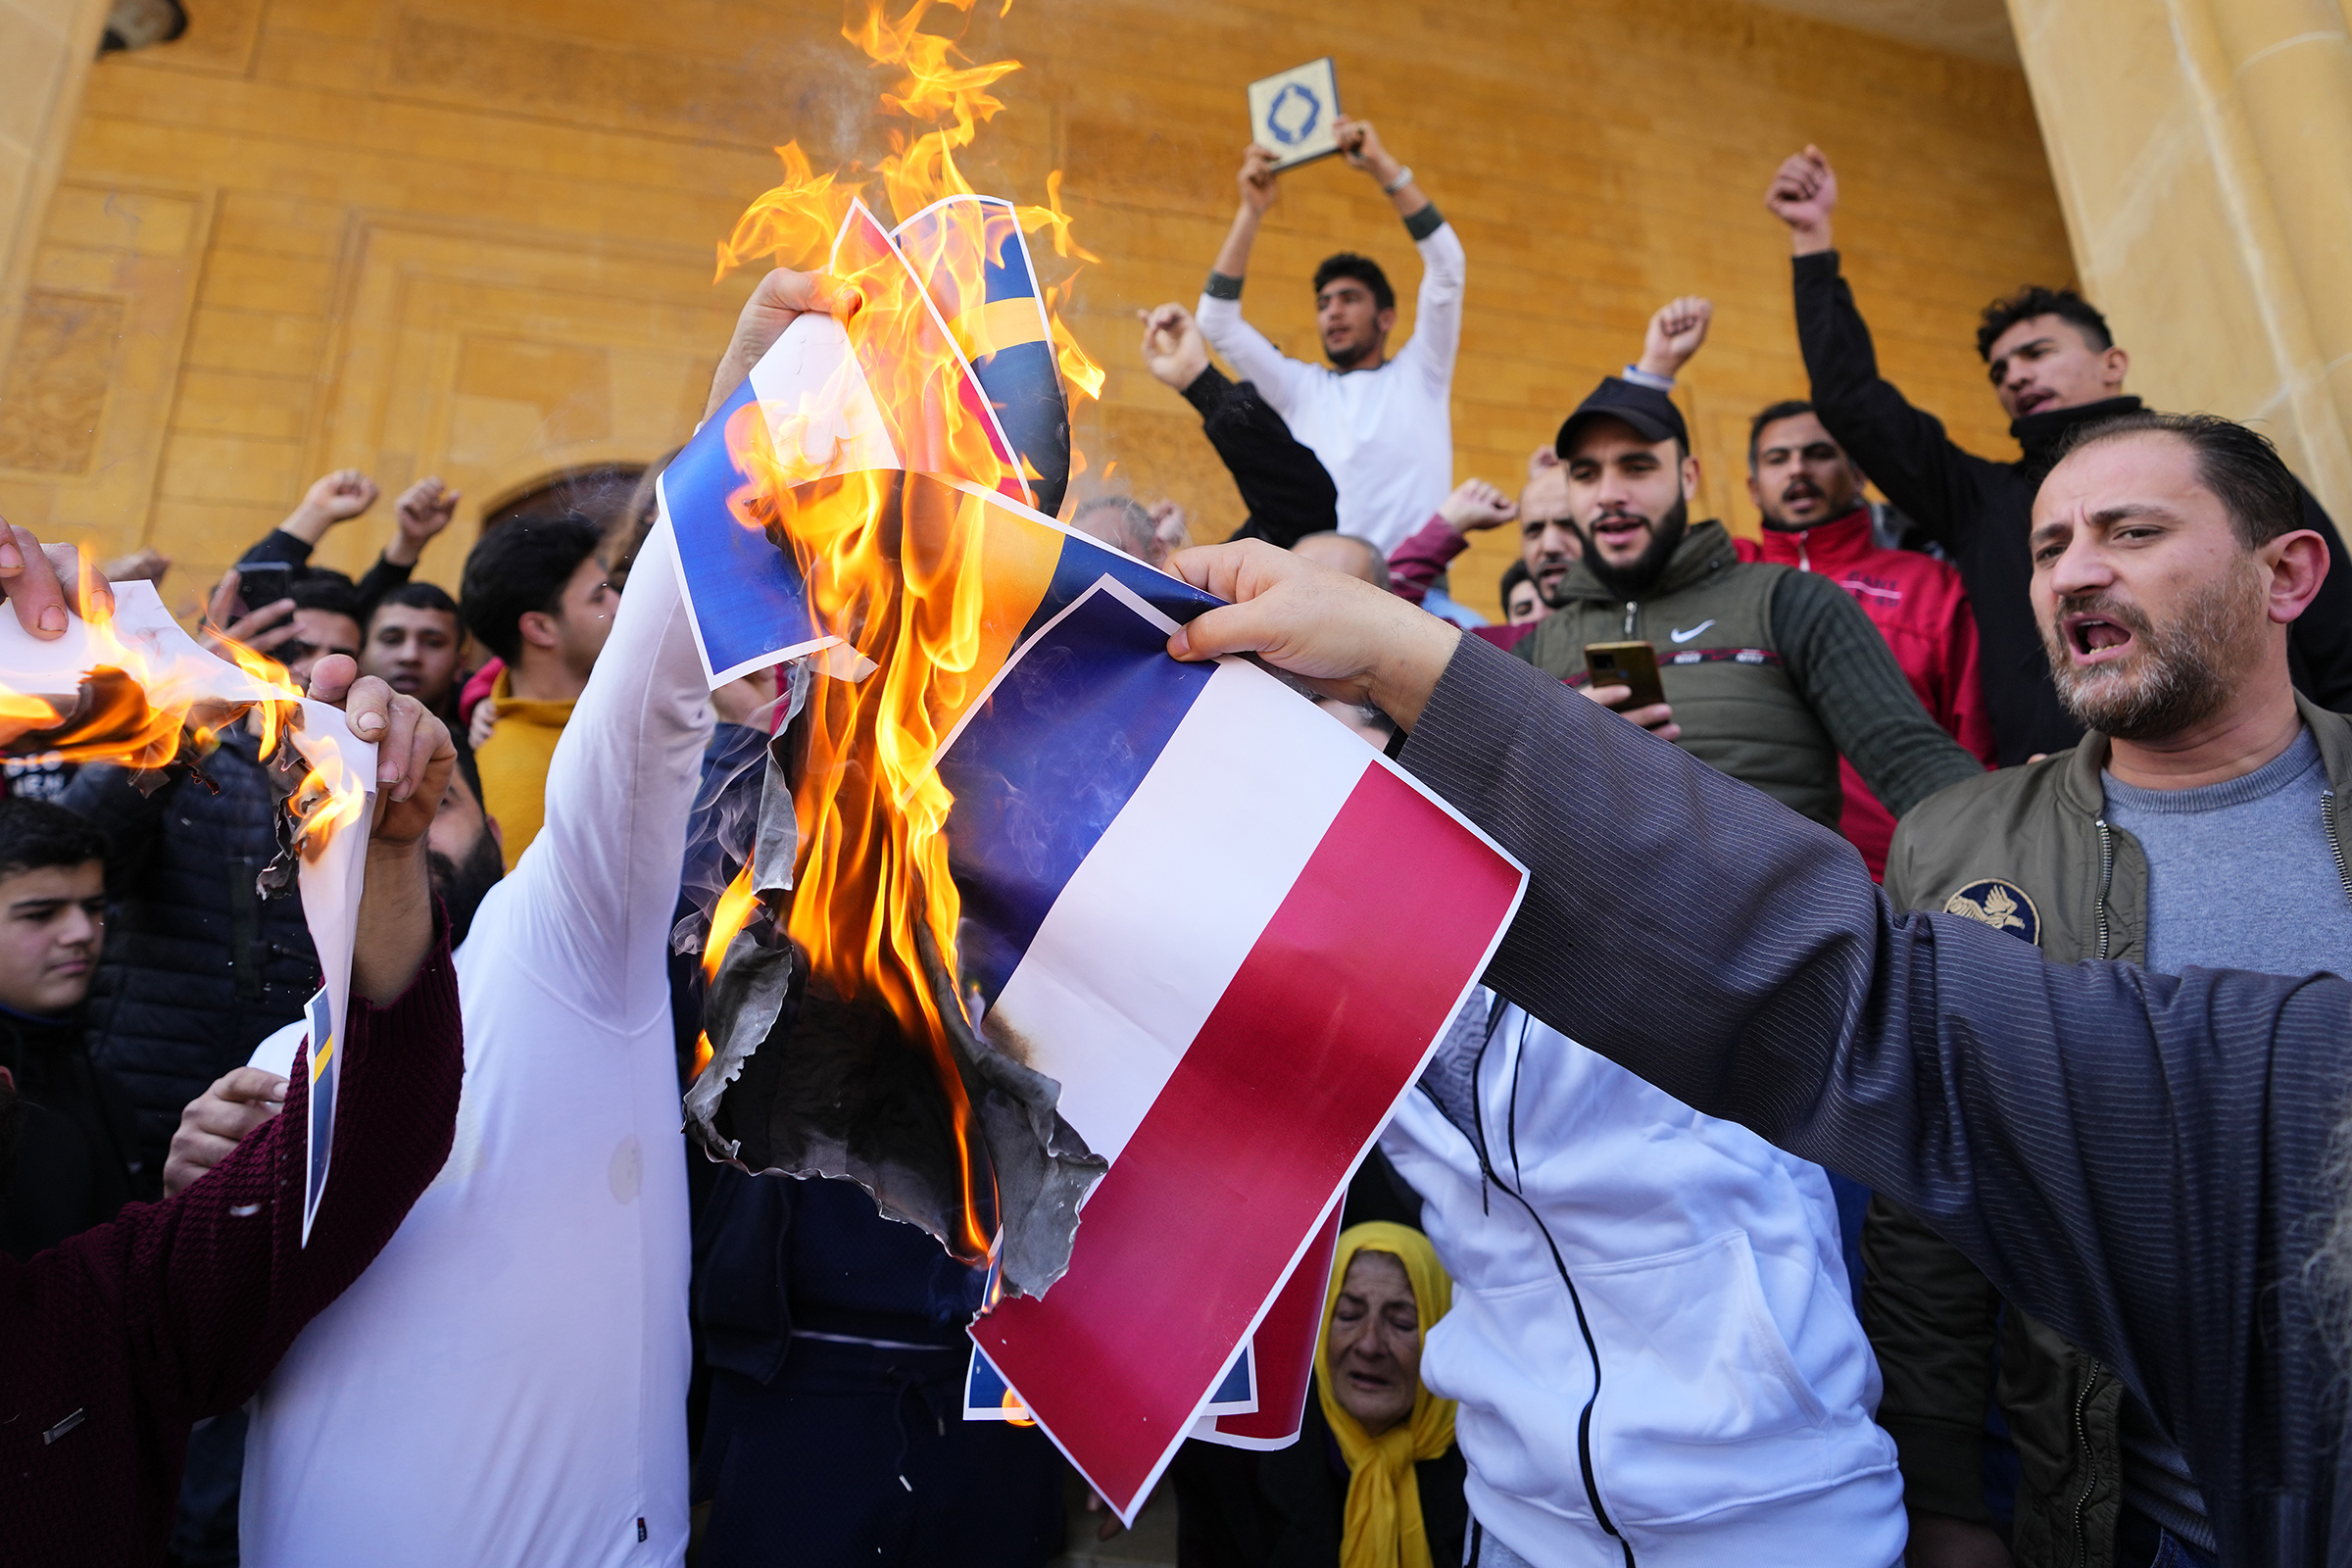 Scores of angry protesters burn the Swedish and Dutch flags after Friday prayers outside Mohammad al-Amin Mosque to denounce the recent desecration of Islam's holy book by a far-right activists in the European countries, in downtown Beirut, Lebanon, Friday, Jan. 27, 2023. Earlier this month, a far-right activist from Denmark staged a protest outside the Turkish Embassy in Stockholm where he burned the Quran, Islam's holy book. Days later, Edwin Wagensveld, Dutch leader of the far-right Pegida movement in the Netherlands tore pages out of a copy of the Quran near the Dutch parliament and stomped on the pages. (AP Photo/Hassan Ammar)